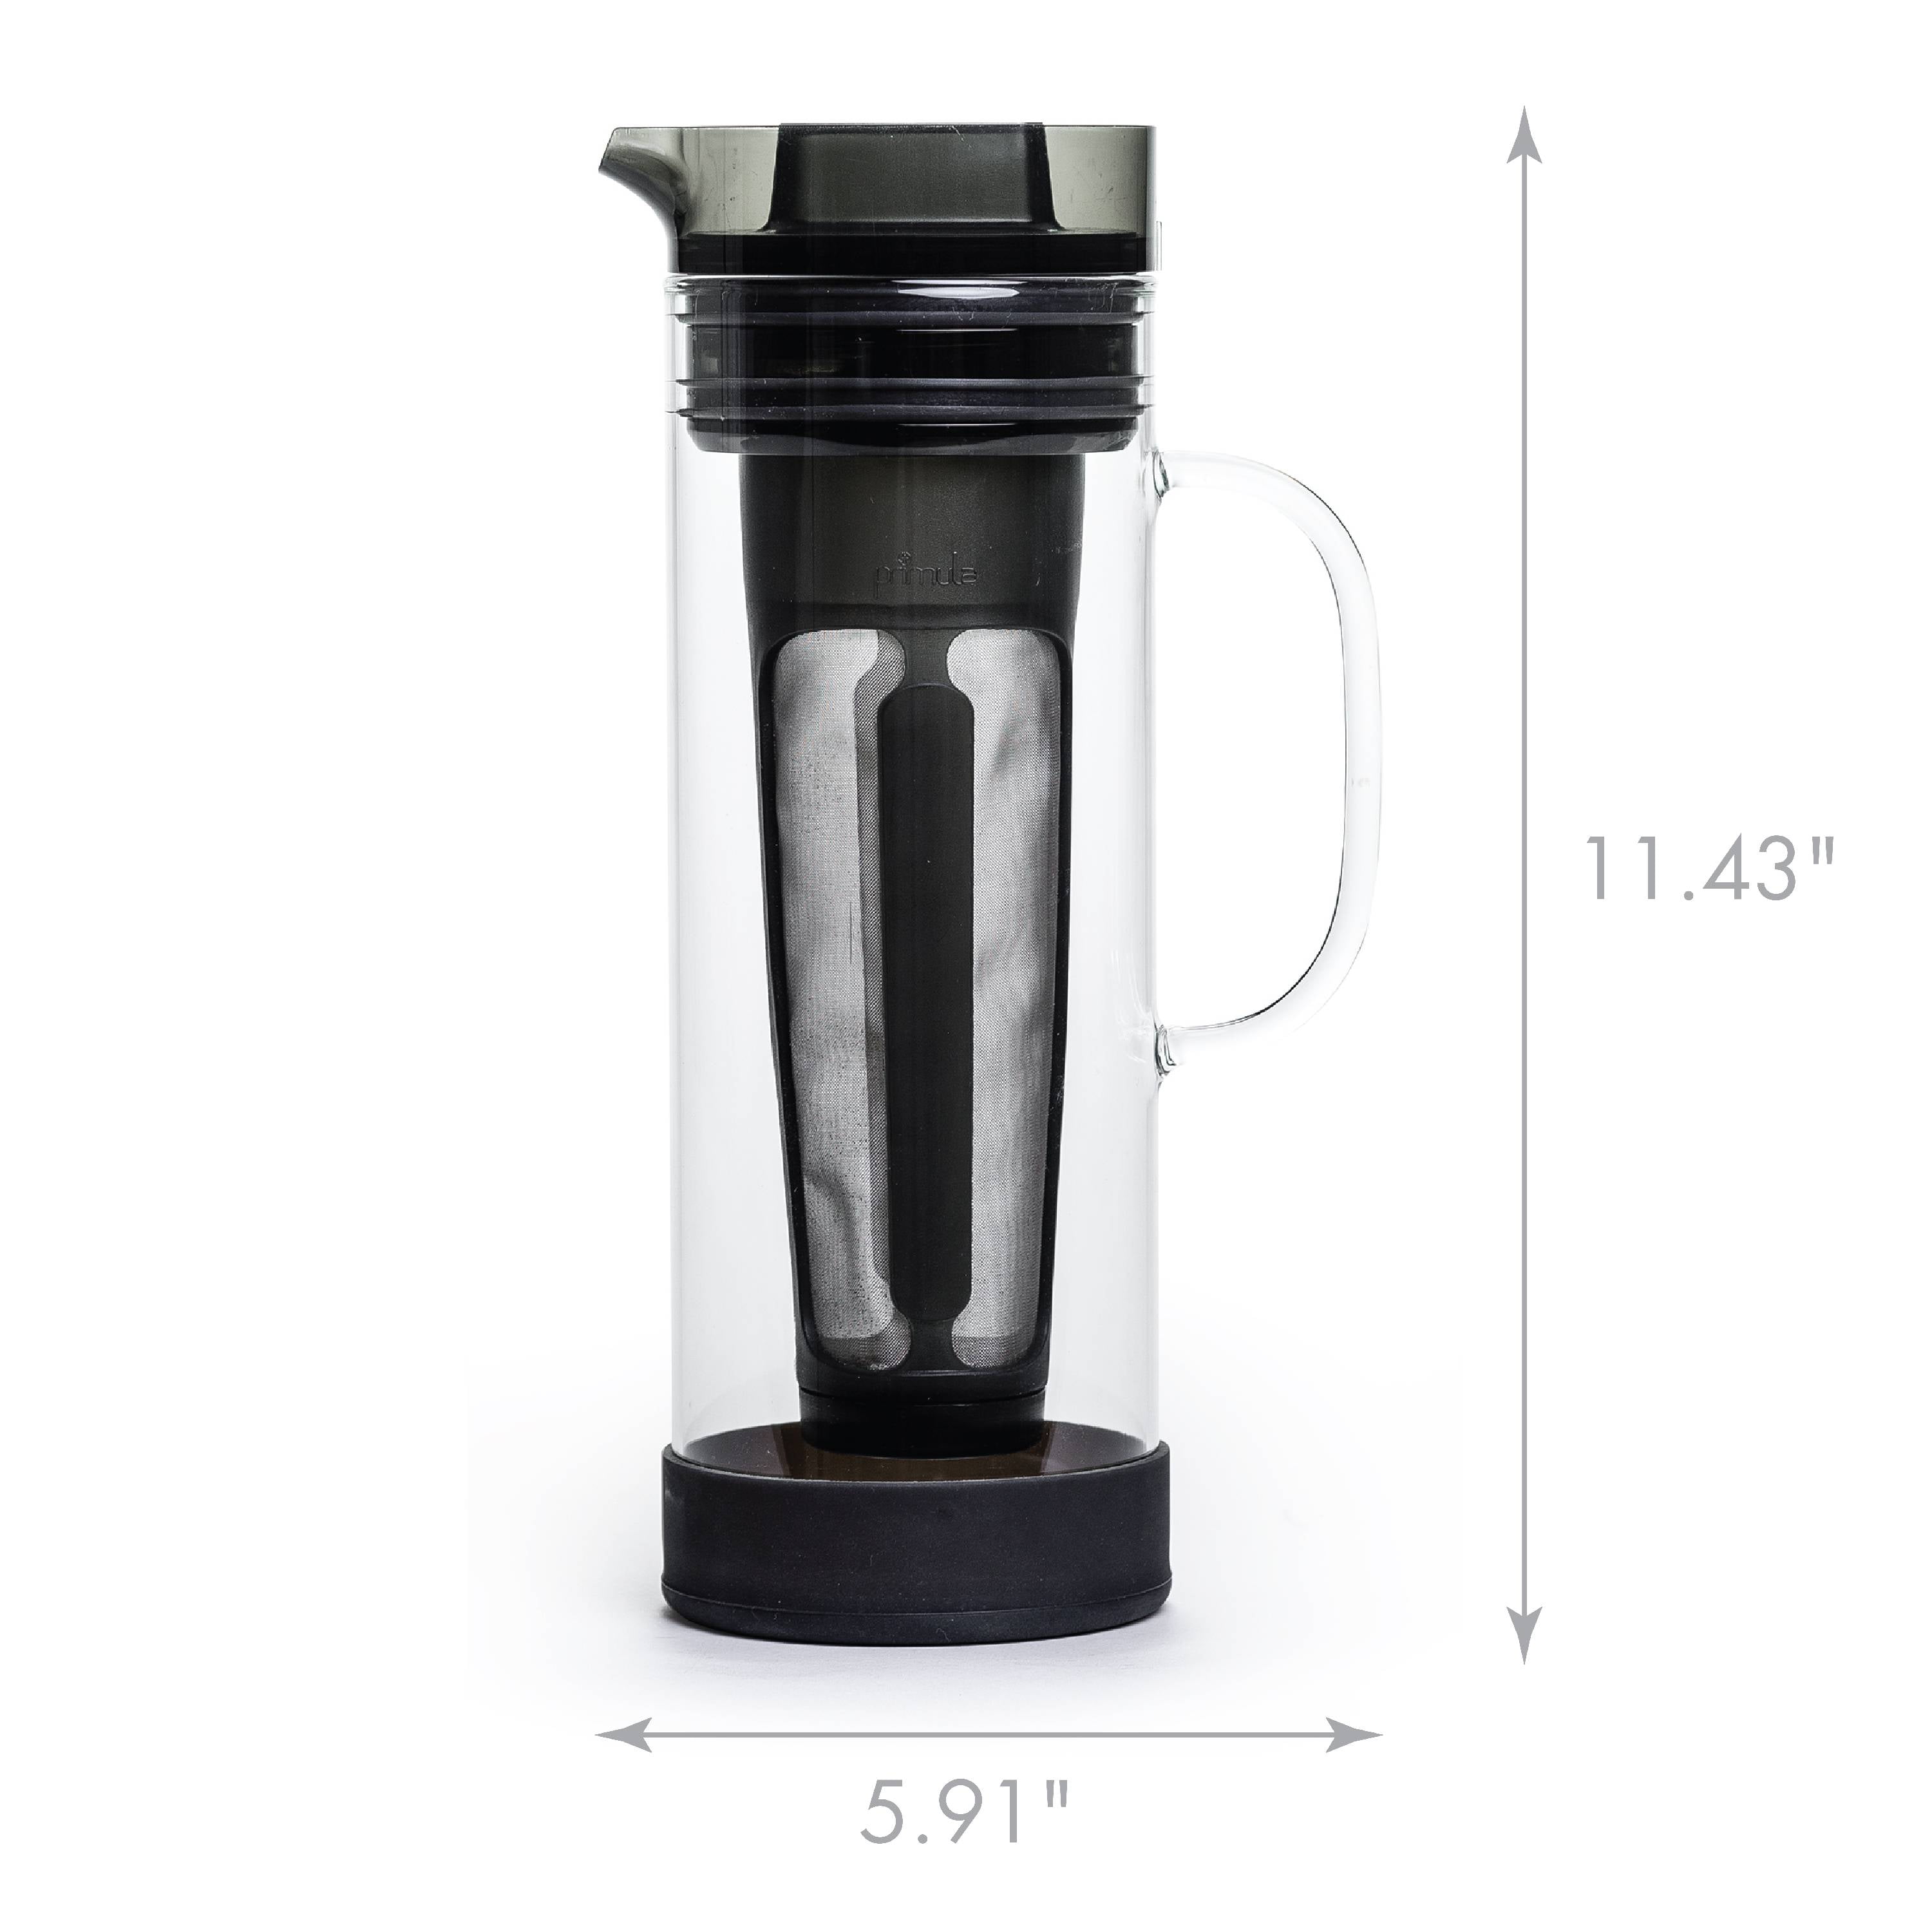 Primula 2-in-1 French Press Cold Brew One Coffee Maker, Comfort Grip  Handle, Durable Glass Carafe, Perfect Size, 6 Cup, Stainless Steel